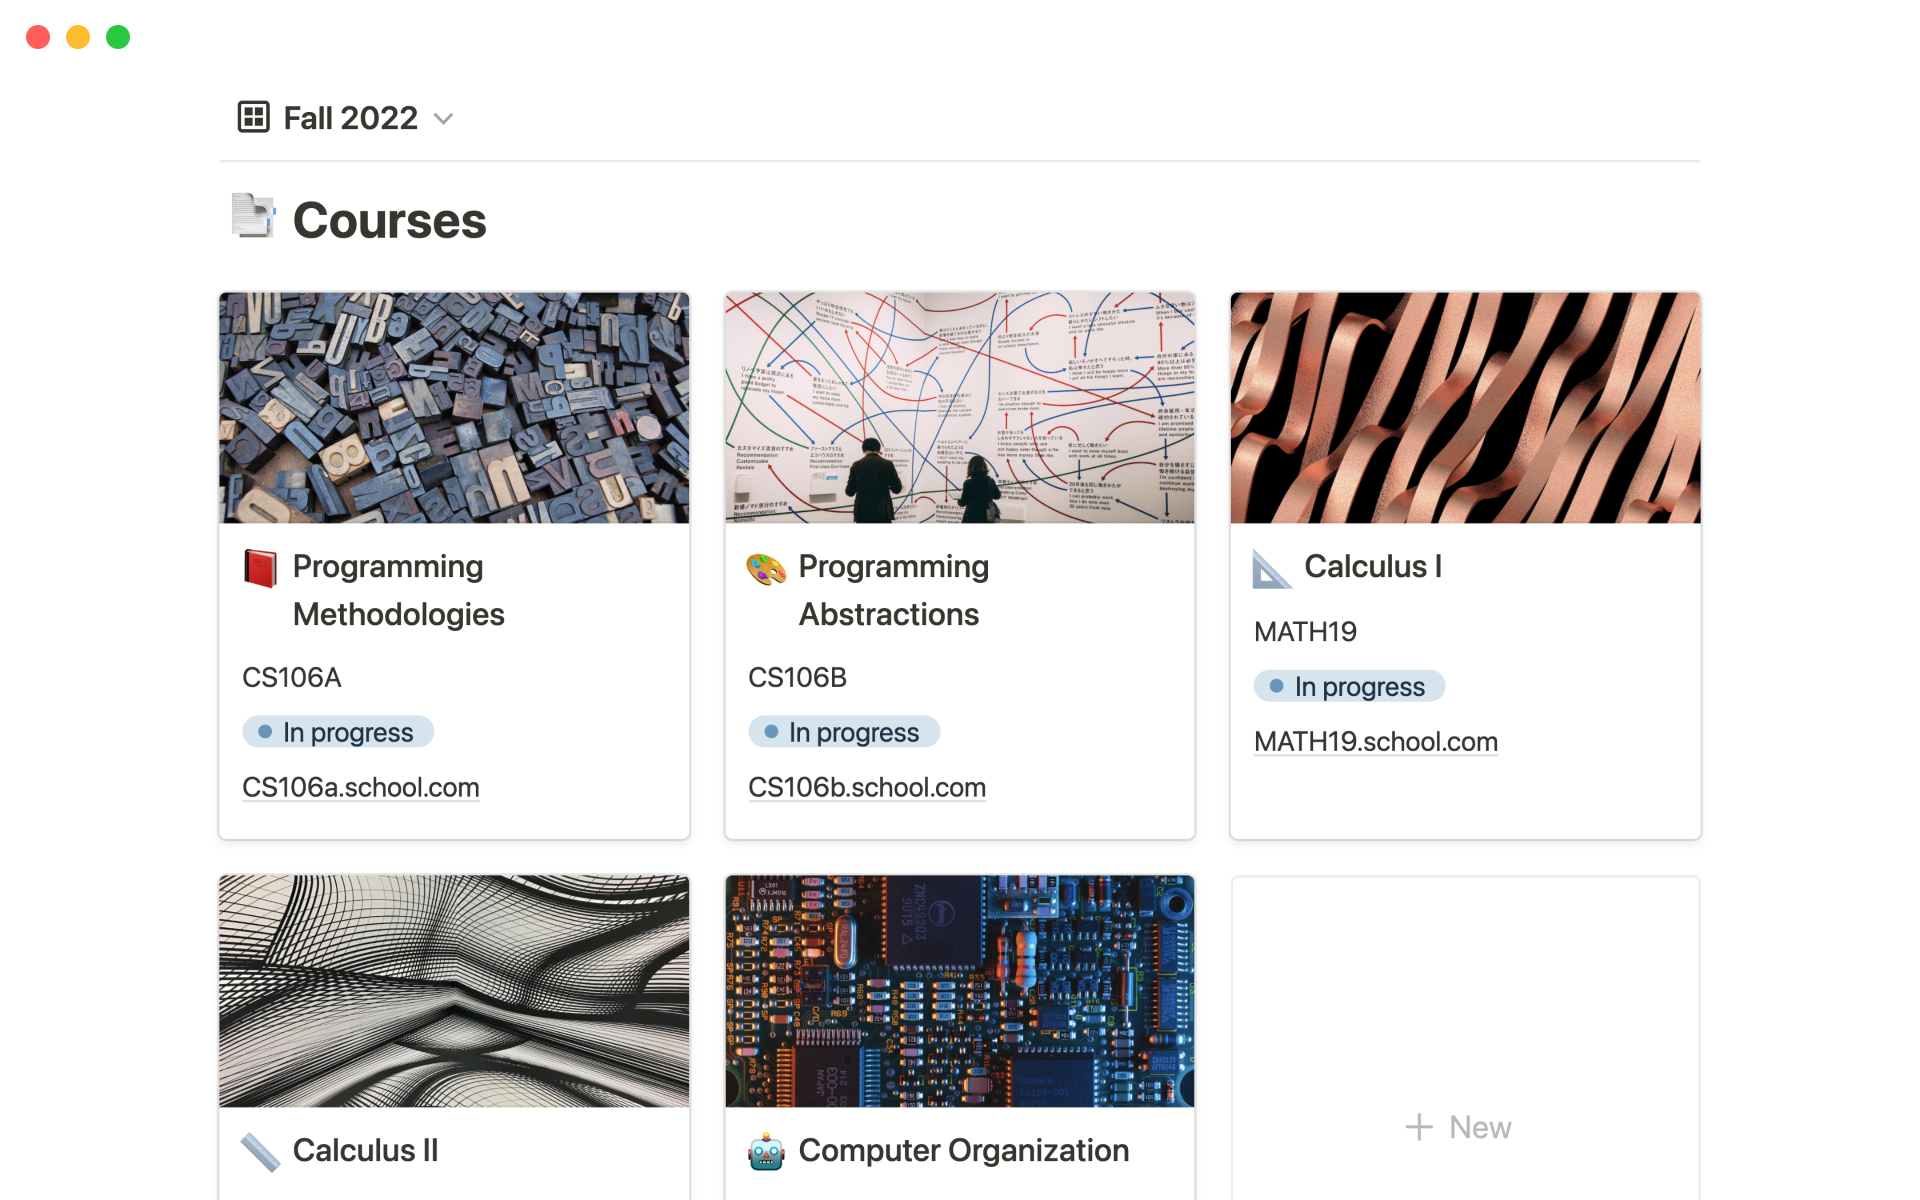 Organize your academic life by using this template as your dashboard for all things CS-related.